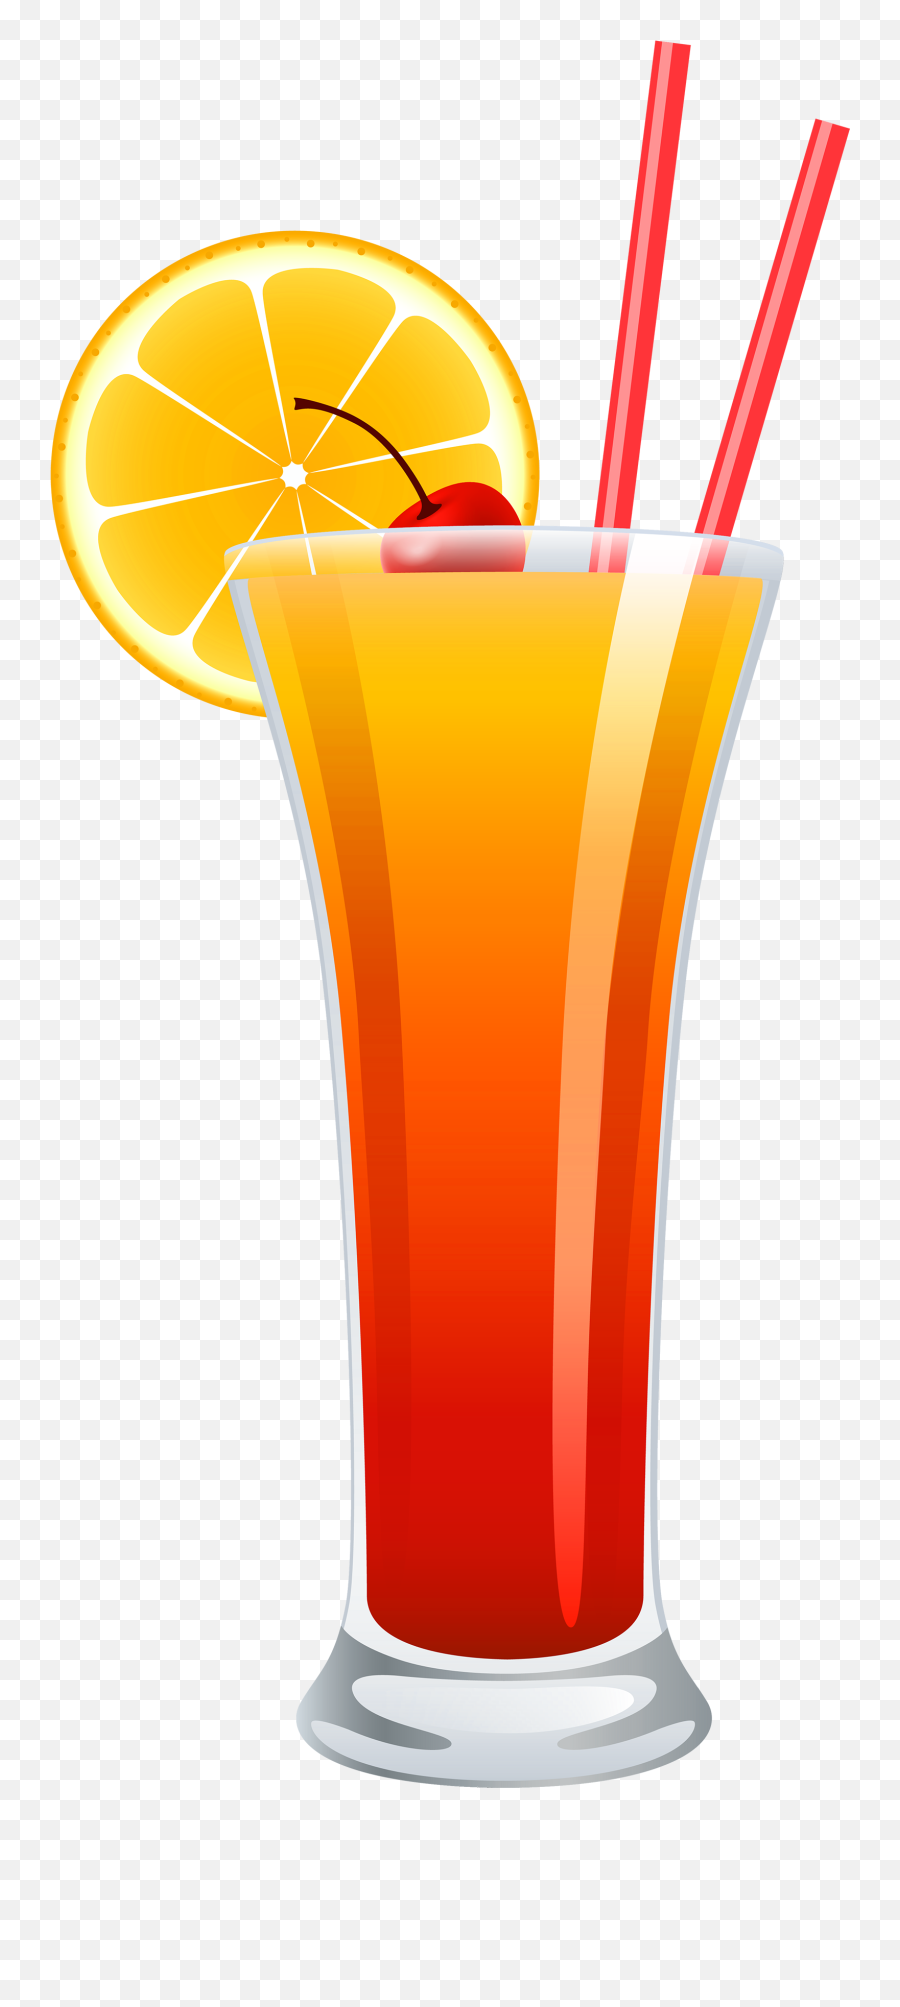 Cocktail Png Image - Tequila Sunrise Cocktail Cartoon Emoji,Alcohol Clipart